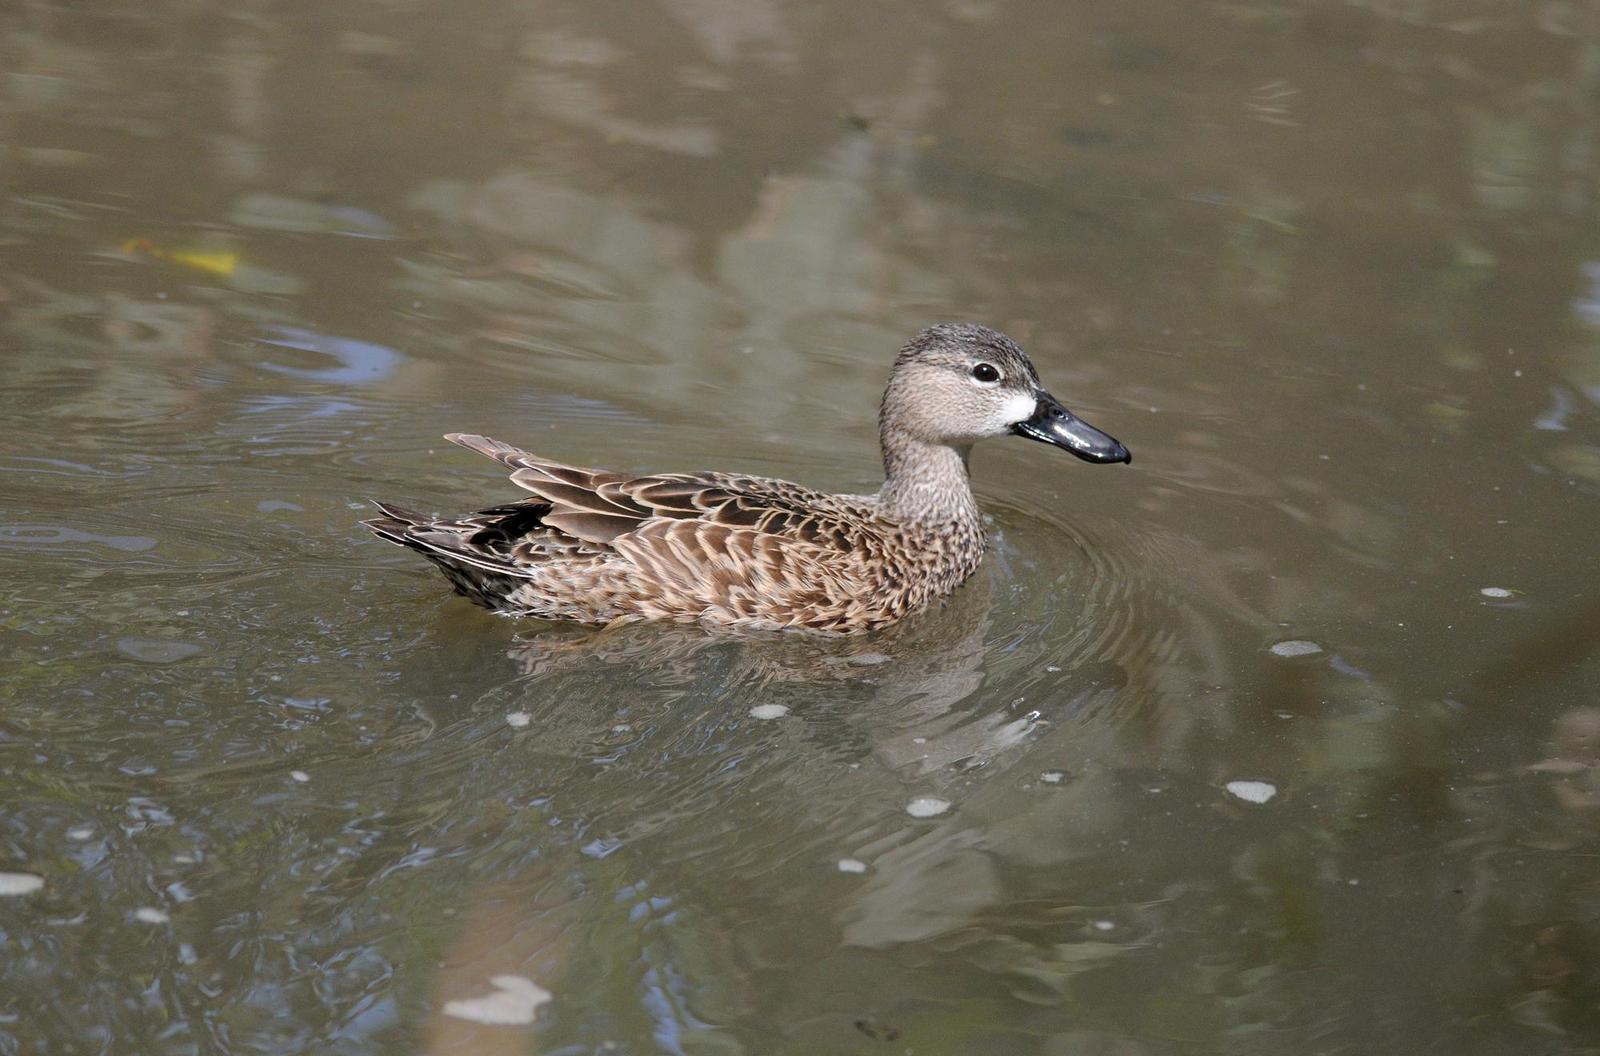 Blue-winged Teal Photo by Steven Mlodinow